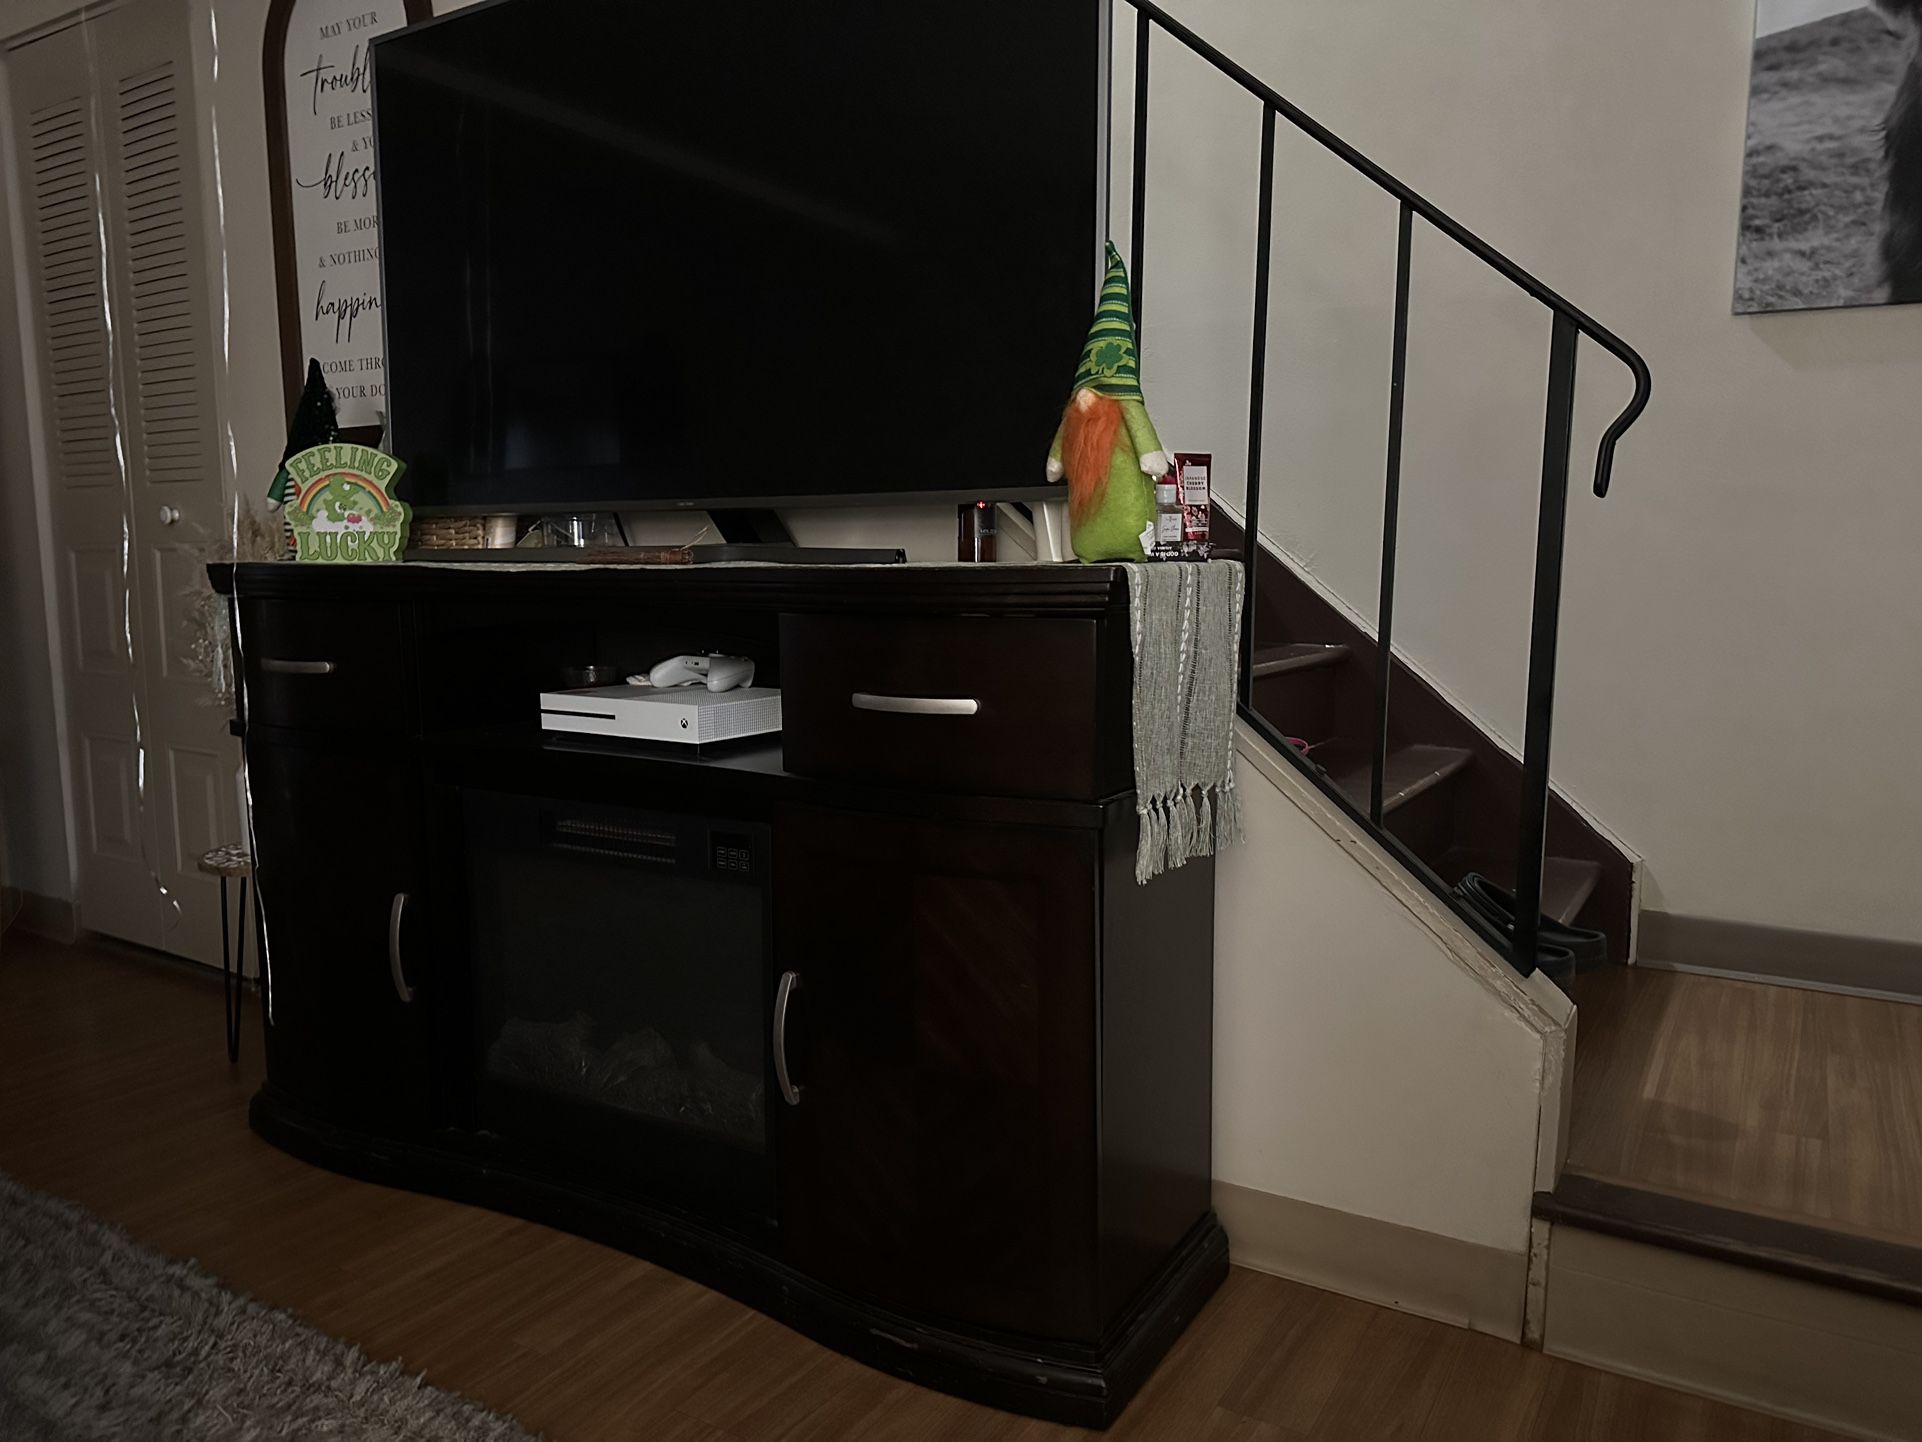 Tv Stand / Fire Place 